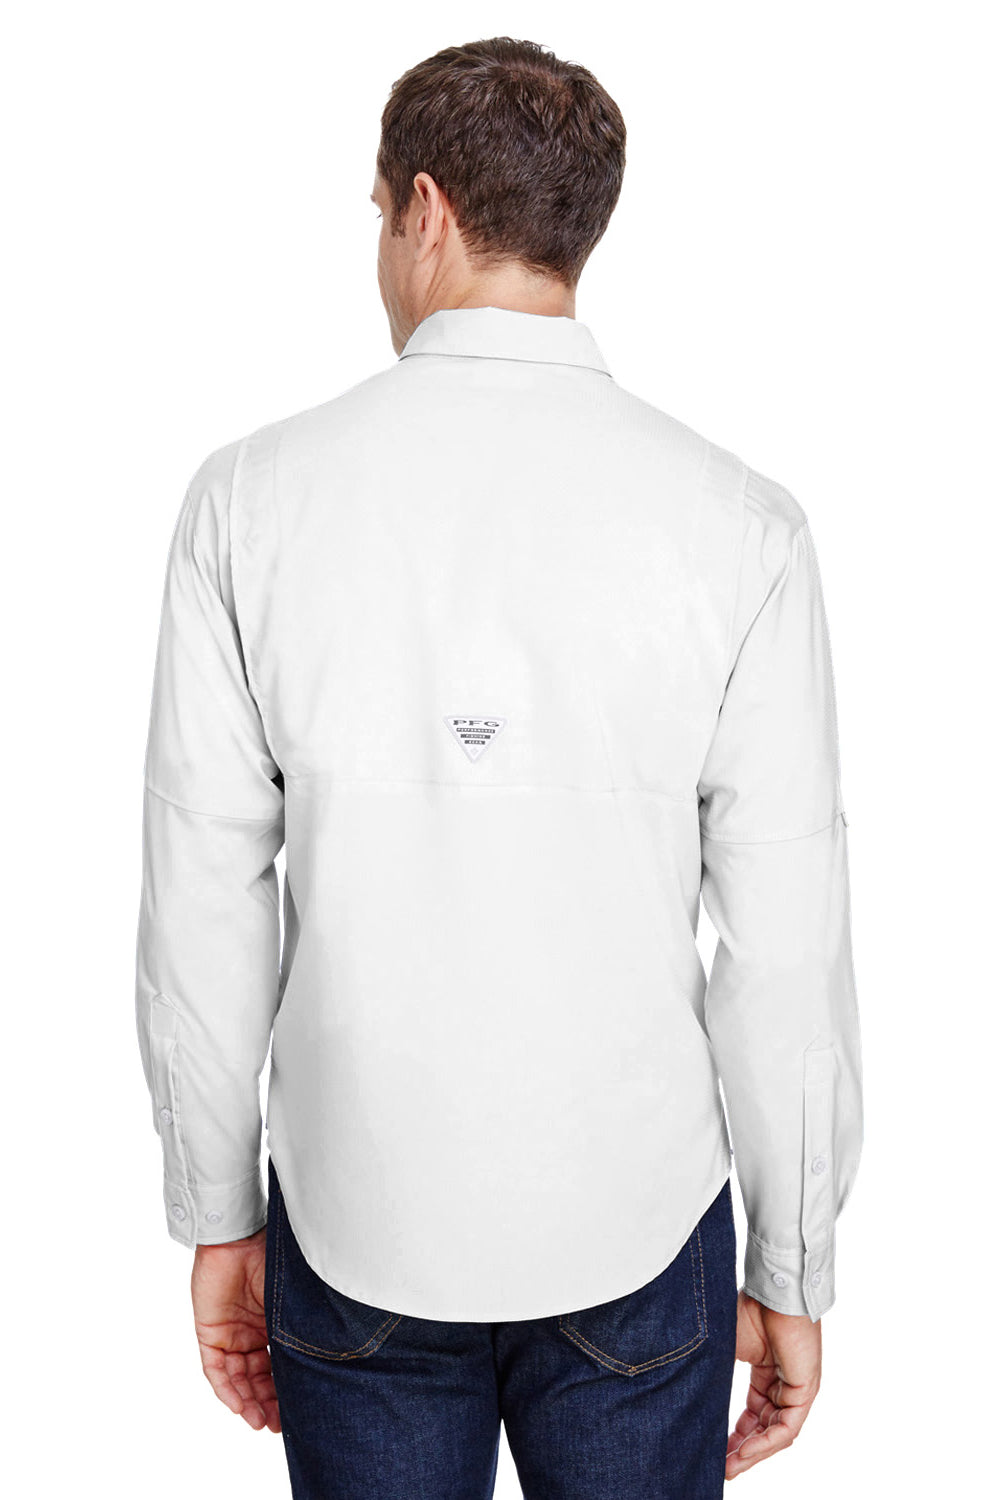 Columbia 7253 Mens Tamiami II Moisture Wicking Long Sleeve Button Down Shirt w/ Double Pockets White Back